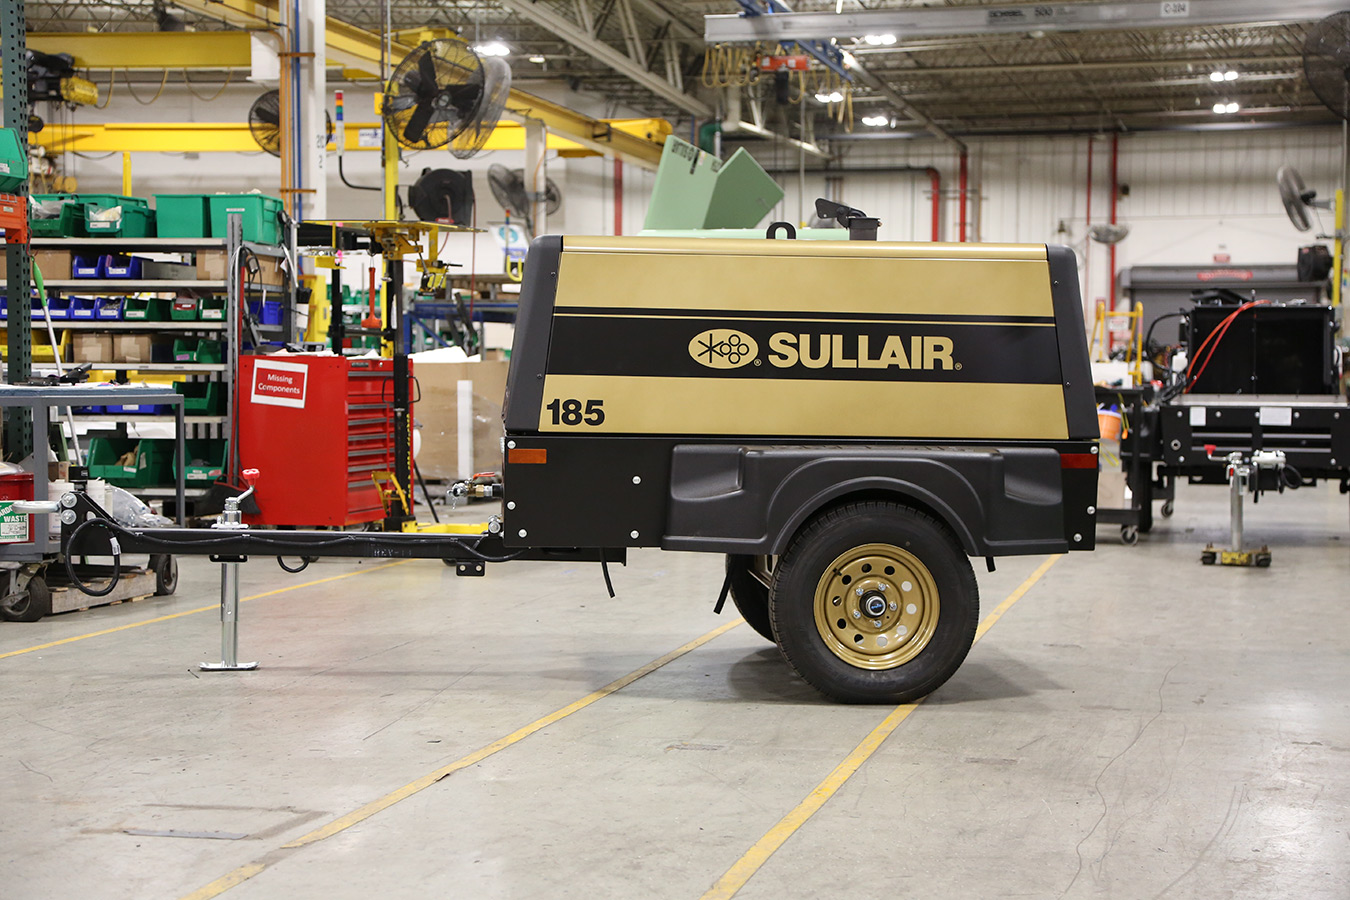 Sullair donates Heart-of-Gold compressor to the ARA Foundation and $10,000 to the American Heart Association